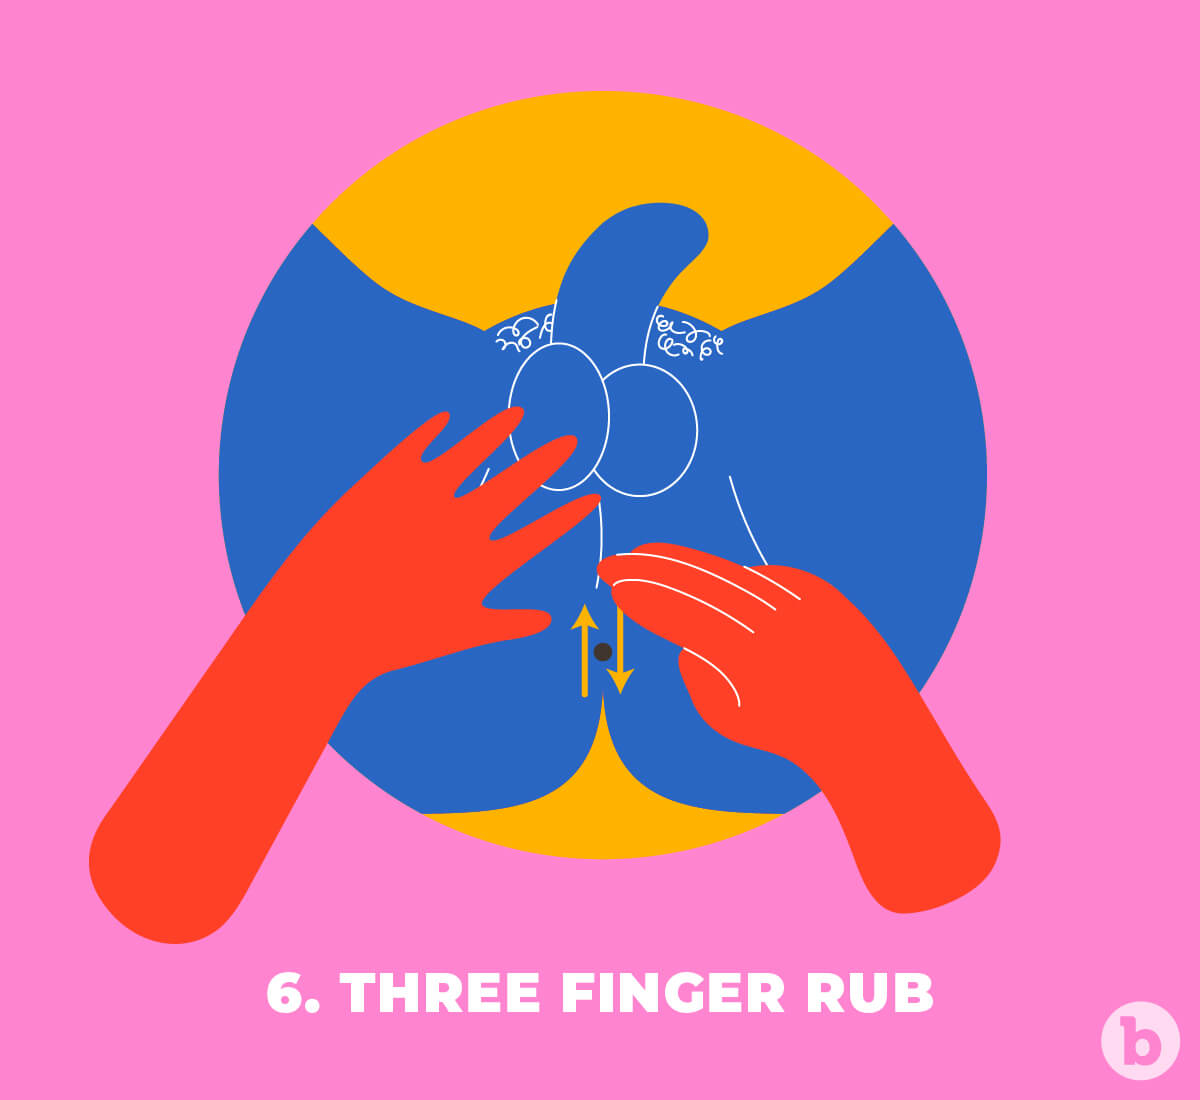 Three fingers rubbing the anus energetically during an anal massage